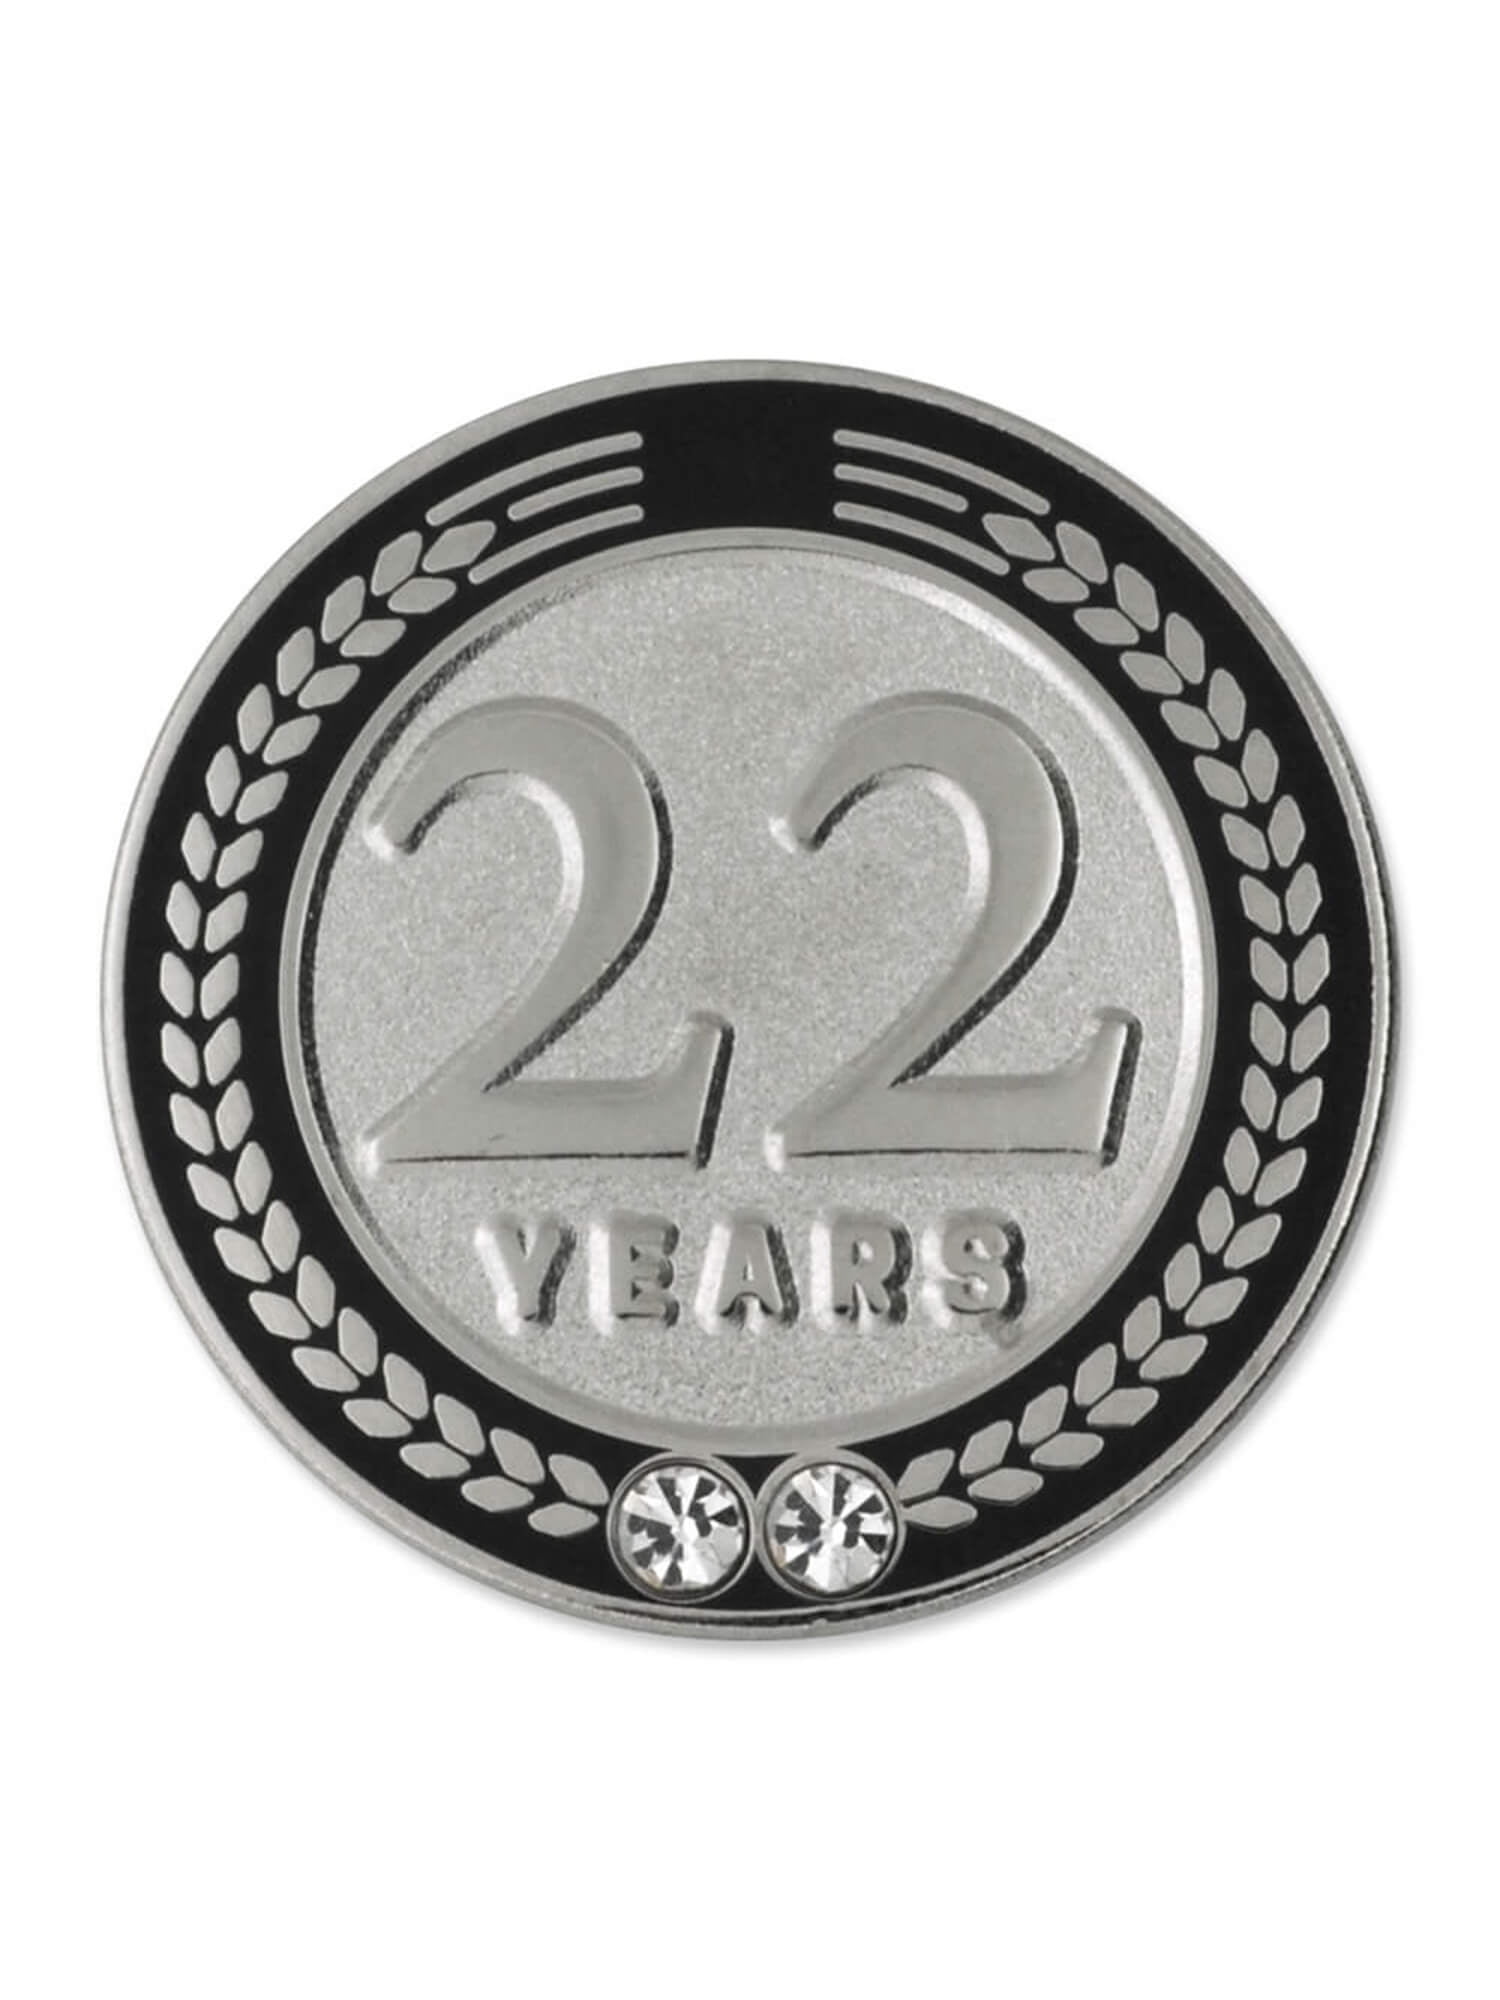 PinMart 22 Years of Service Award Employee Recognition Gift Lapel Pin Black 